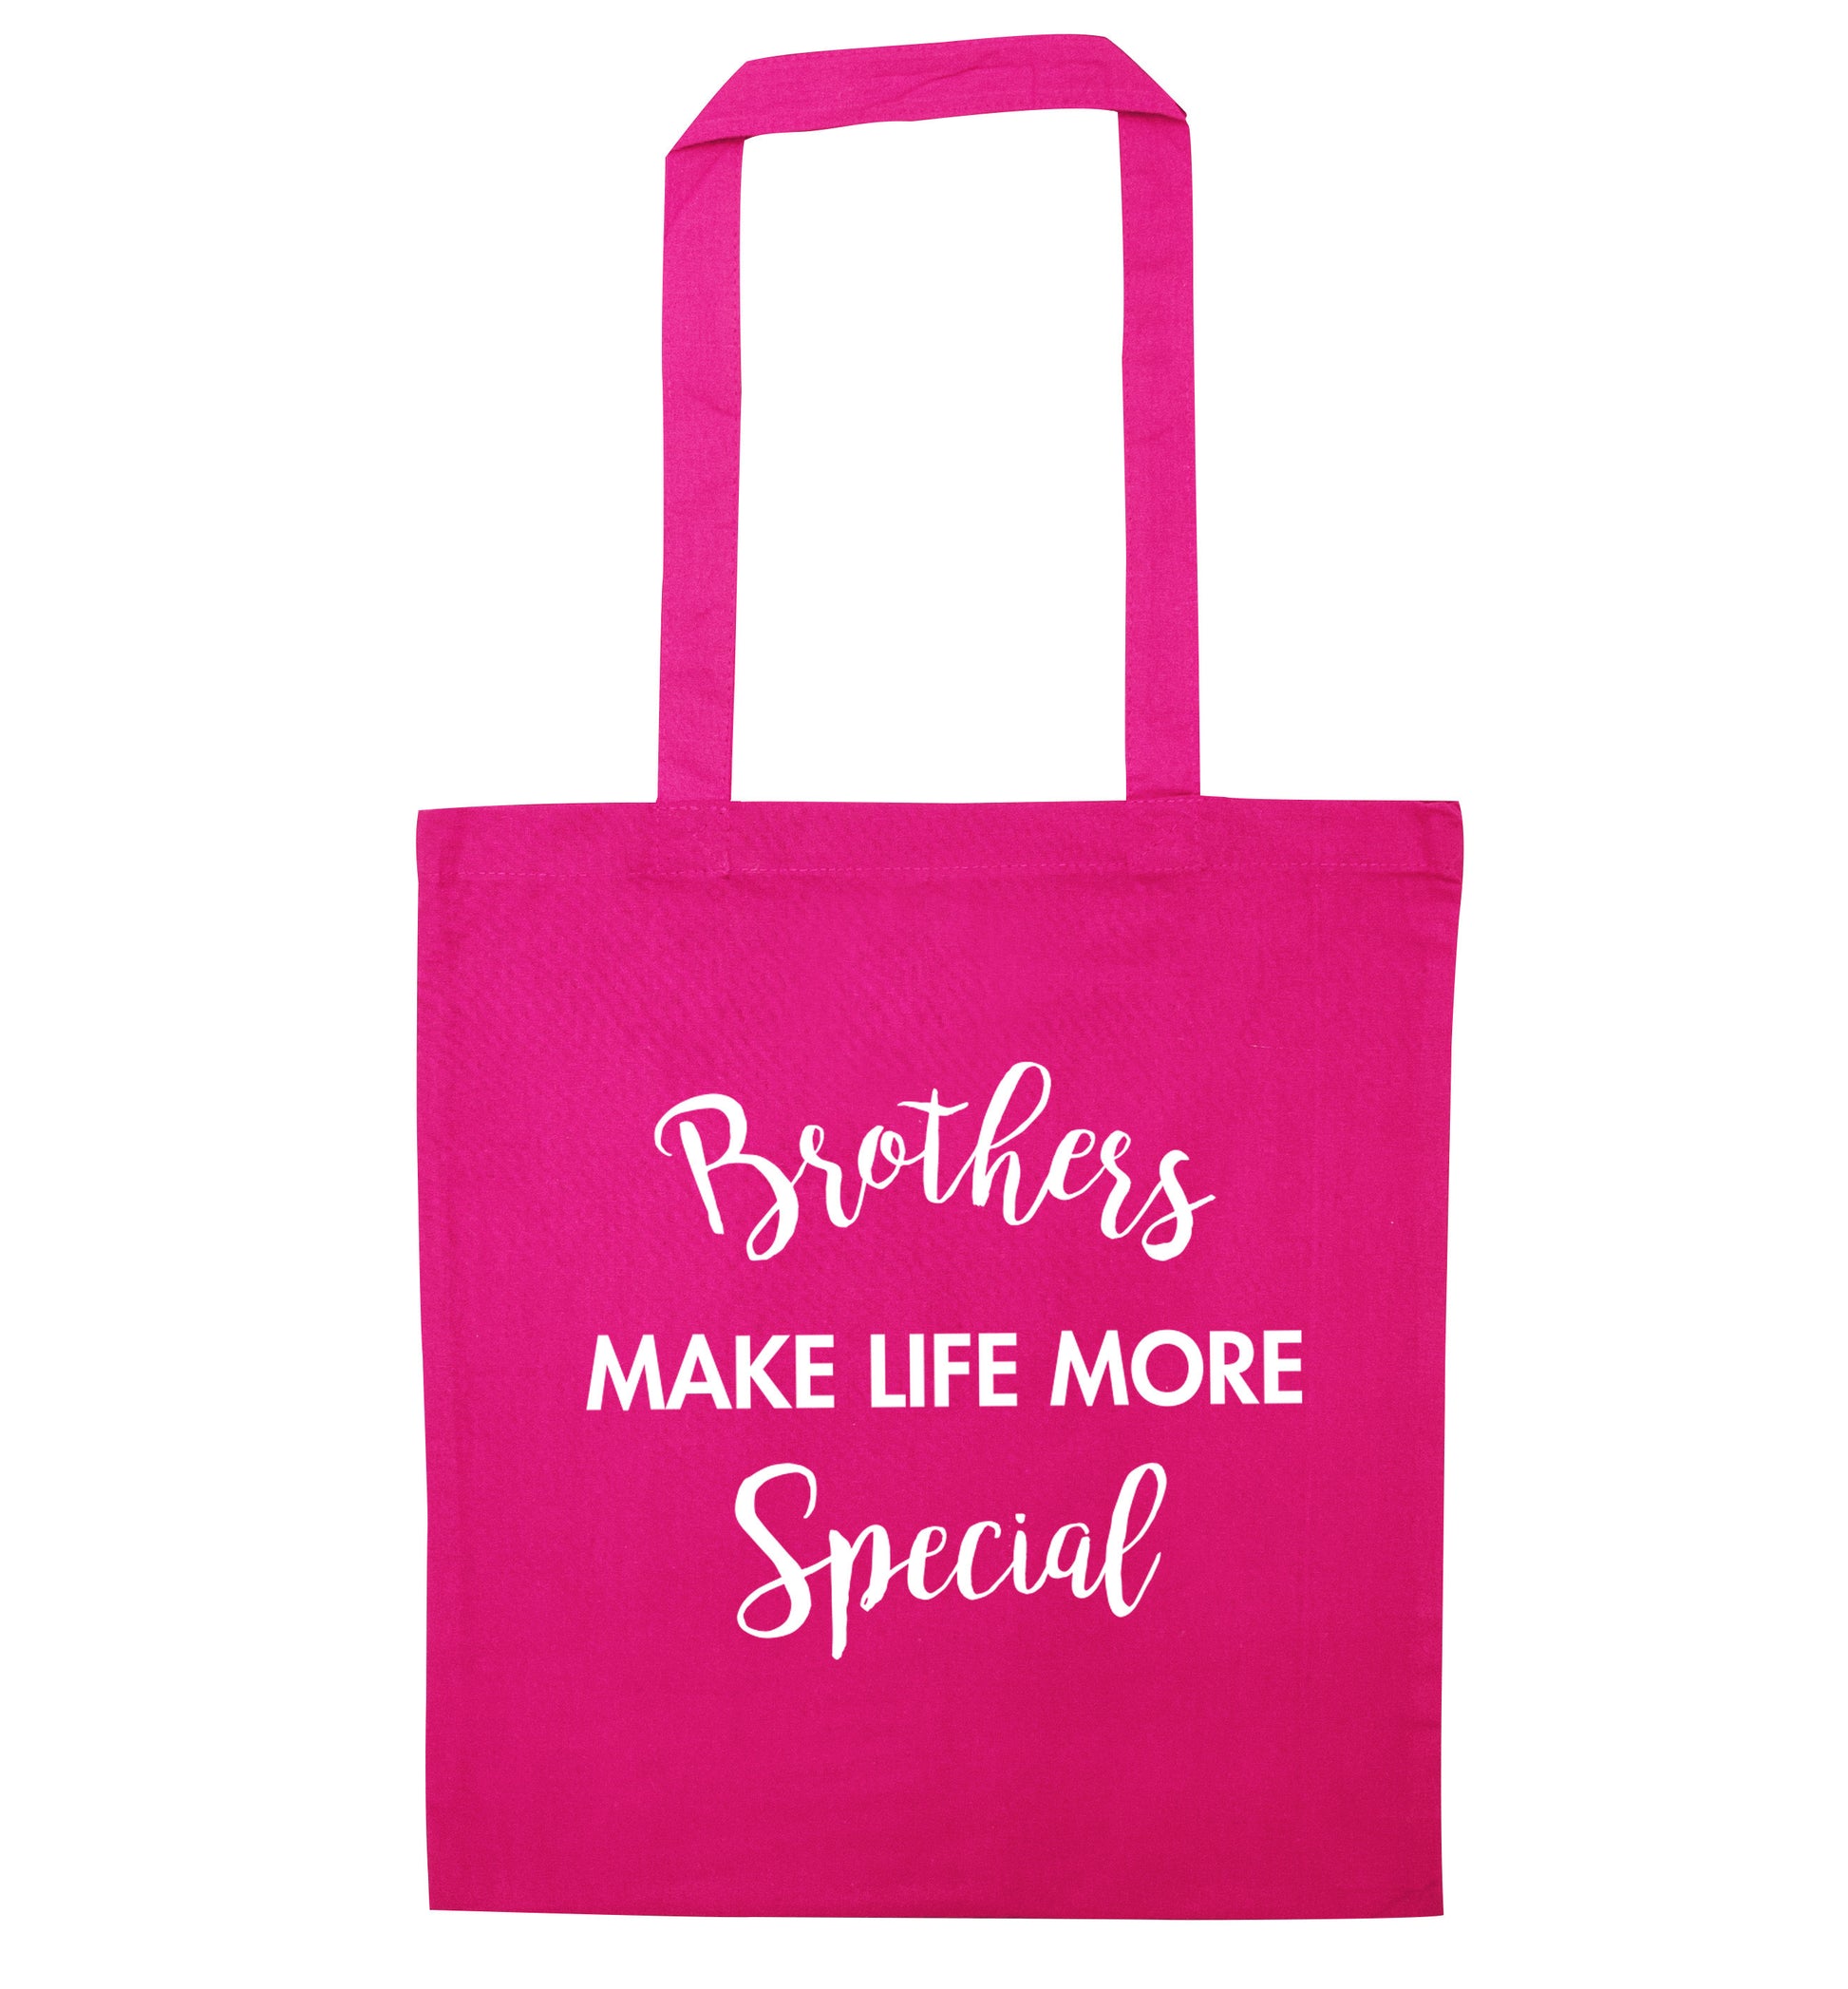 Brothers make life more special pink tote bag